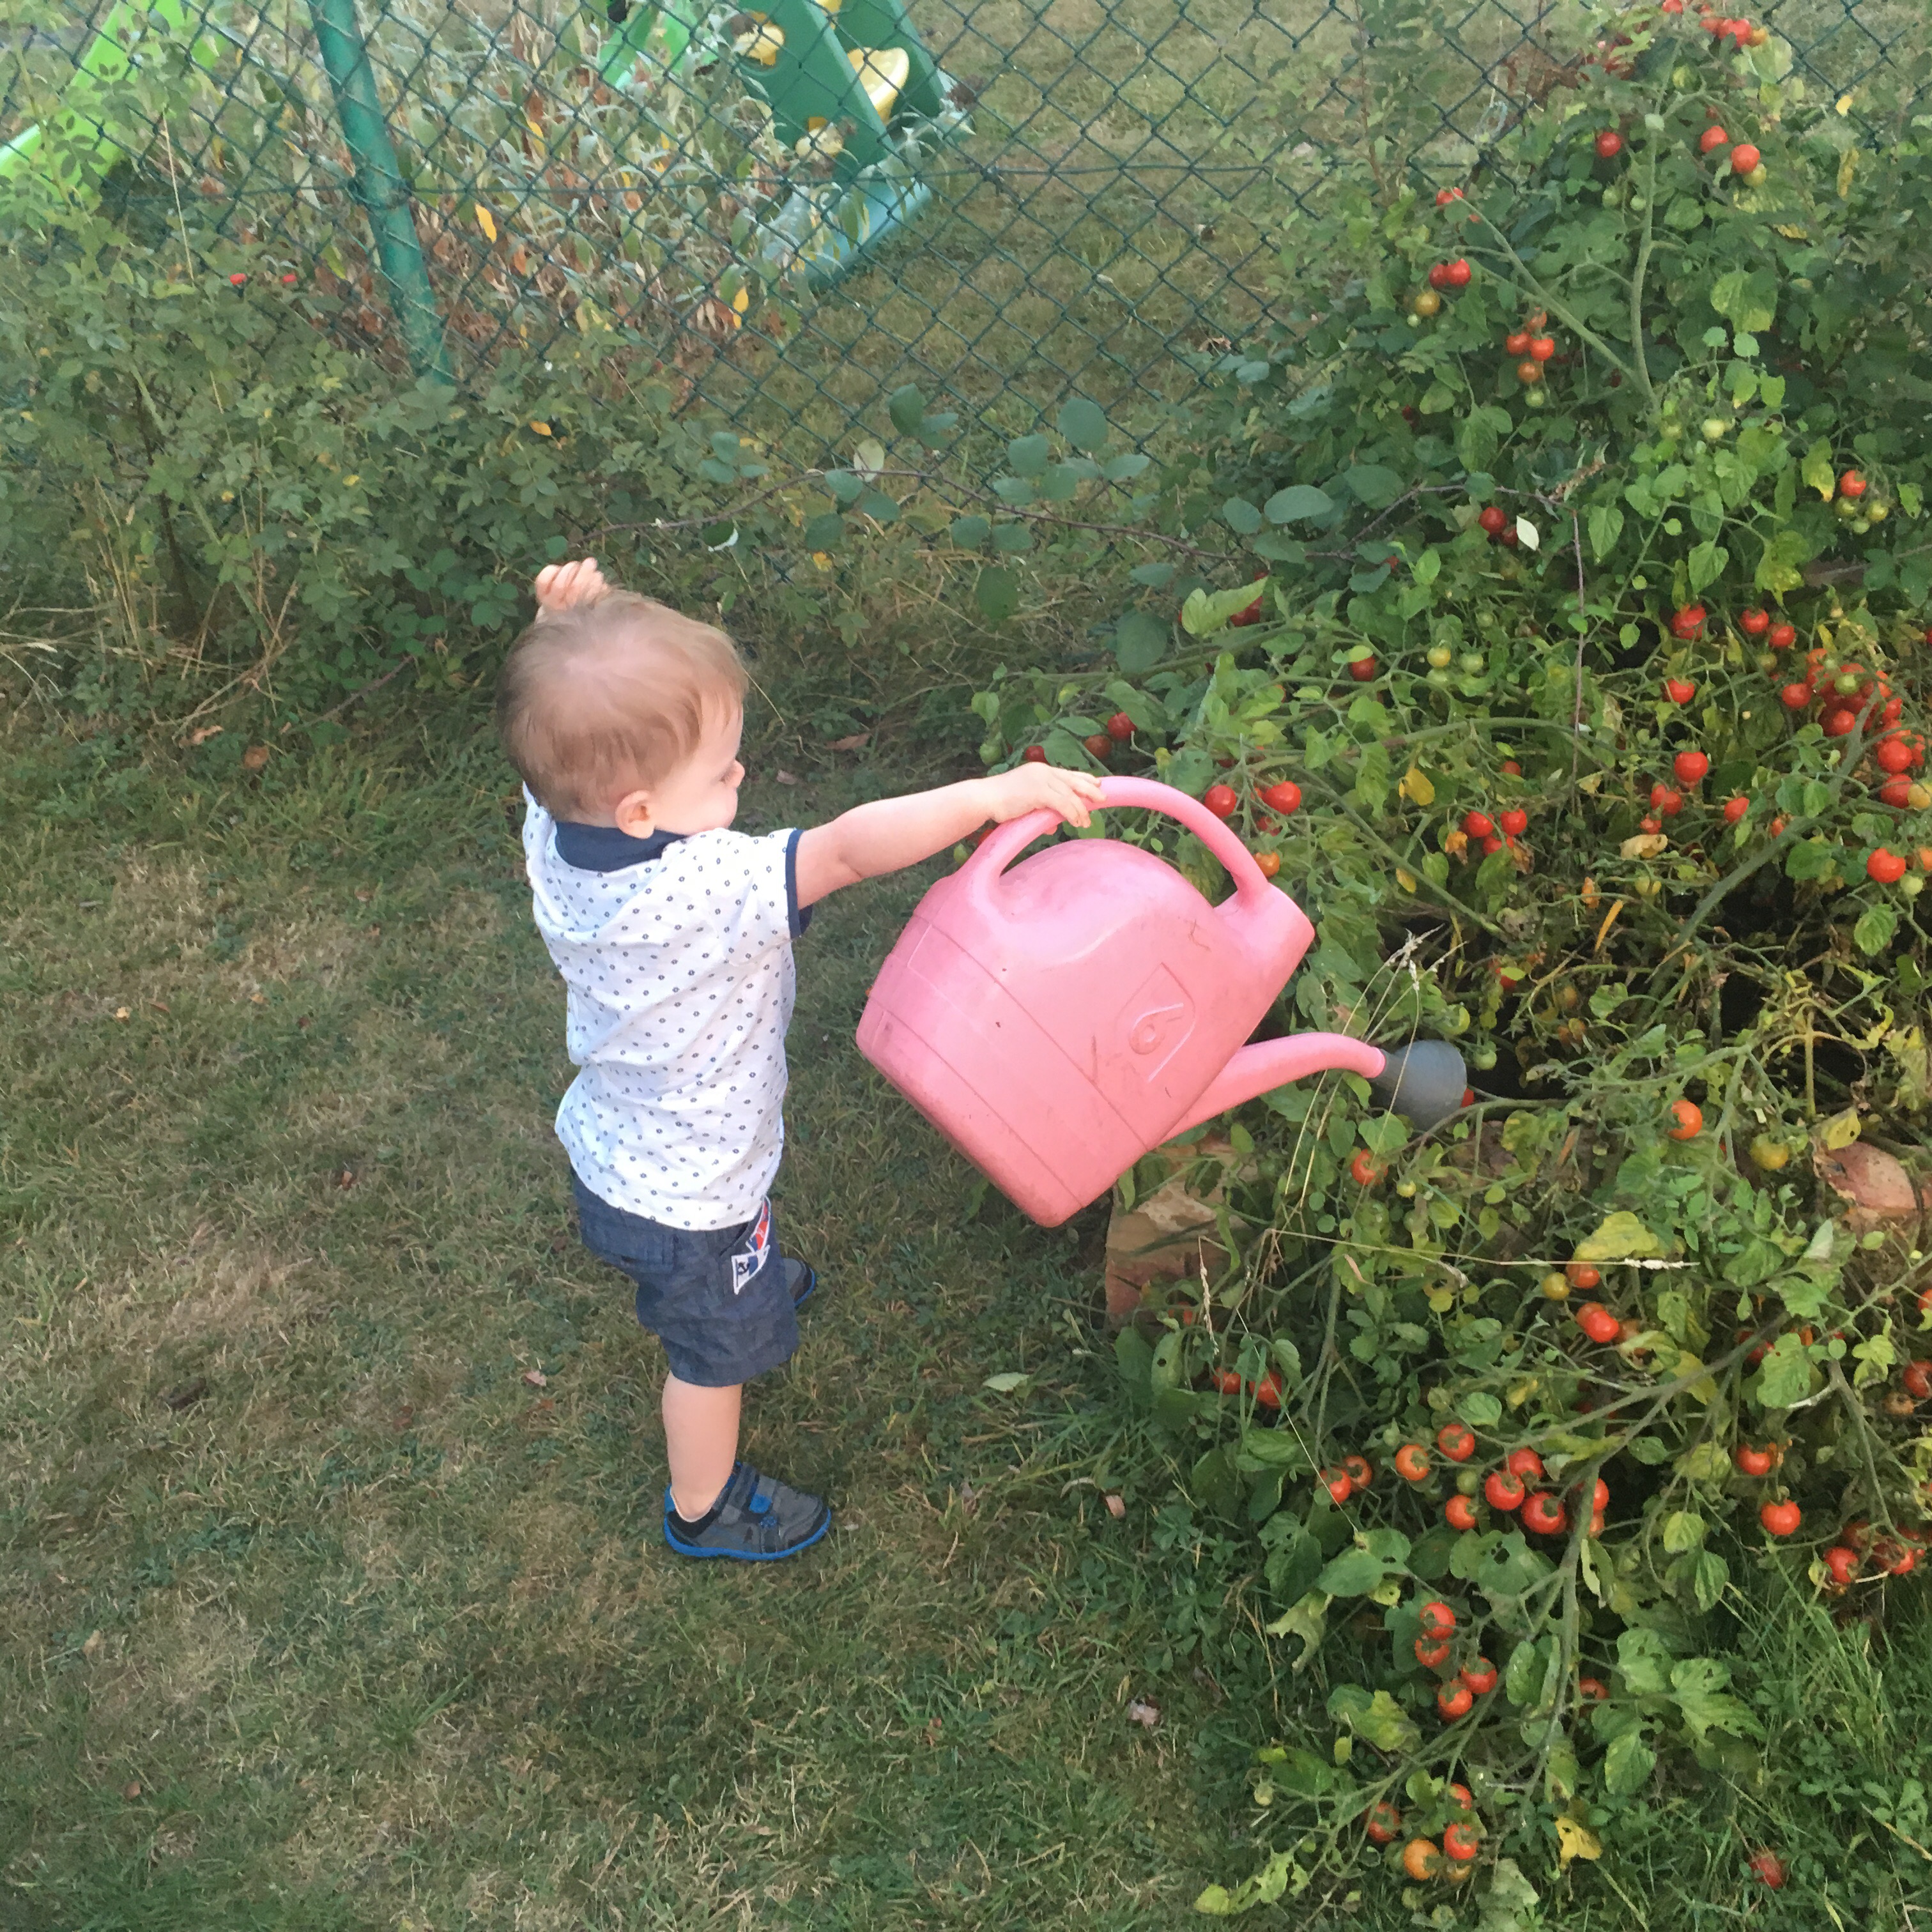 Getting your Toddler Involved with the Gardening.